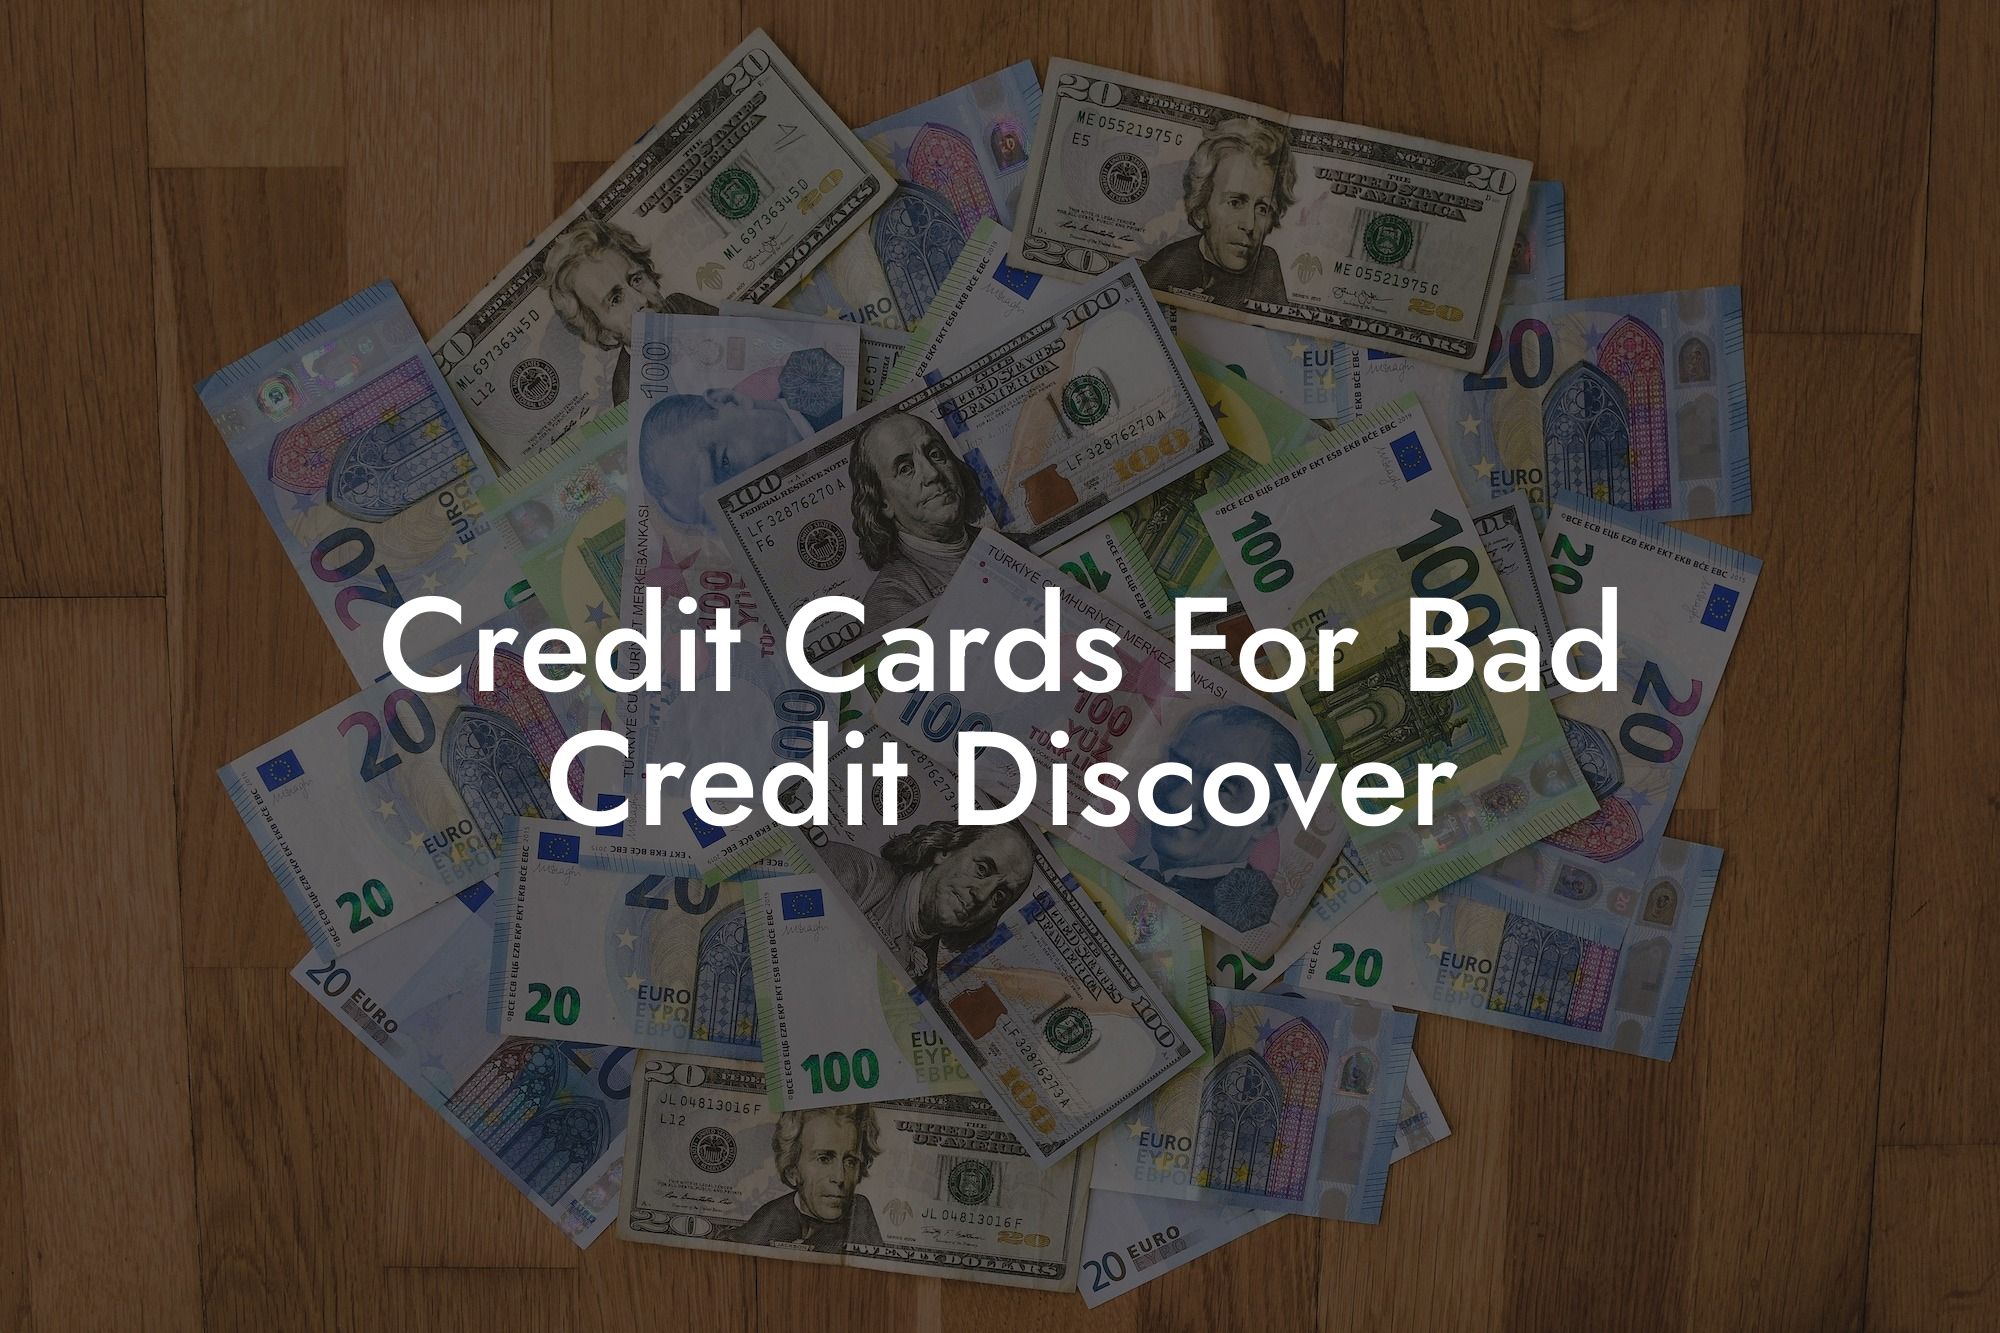 Credit Cards For Bad Credit Discover